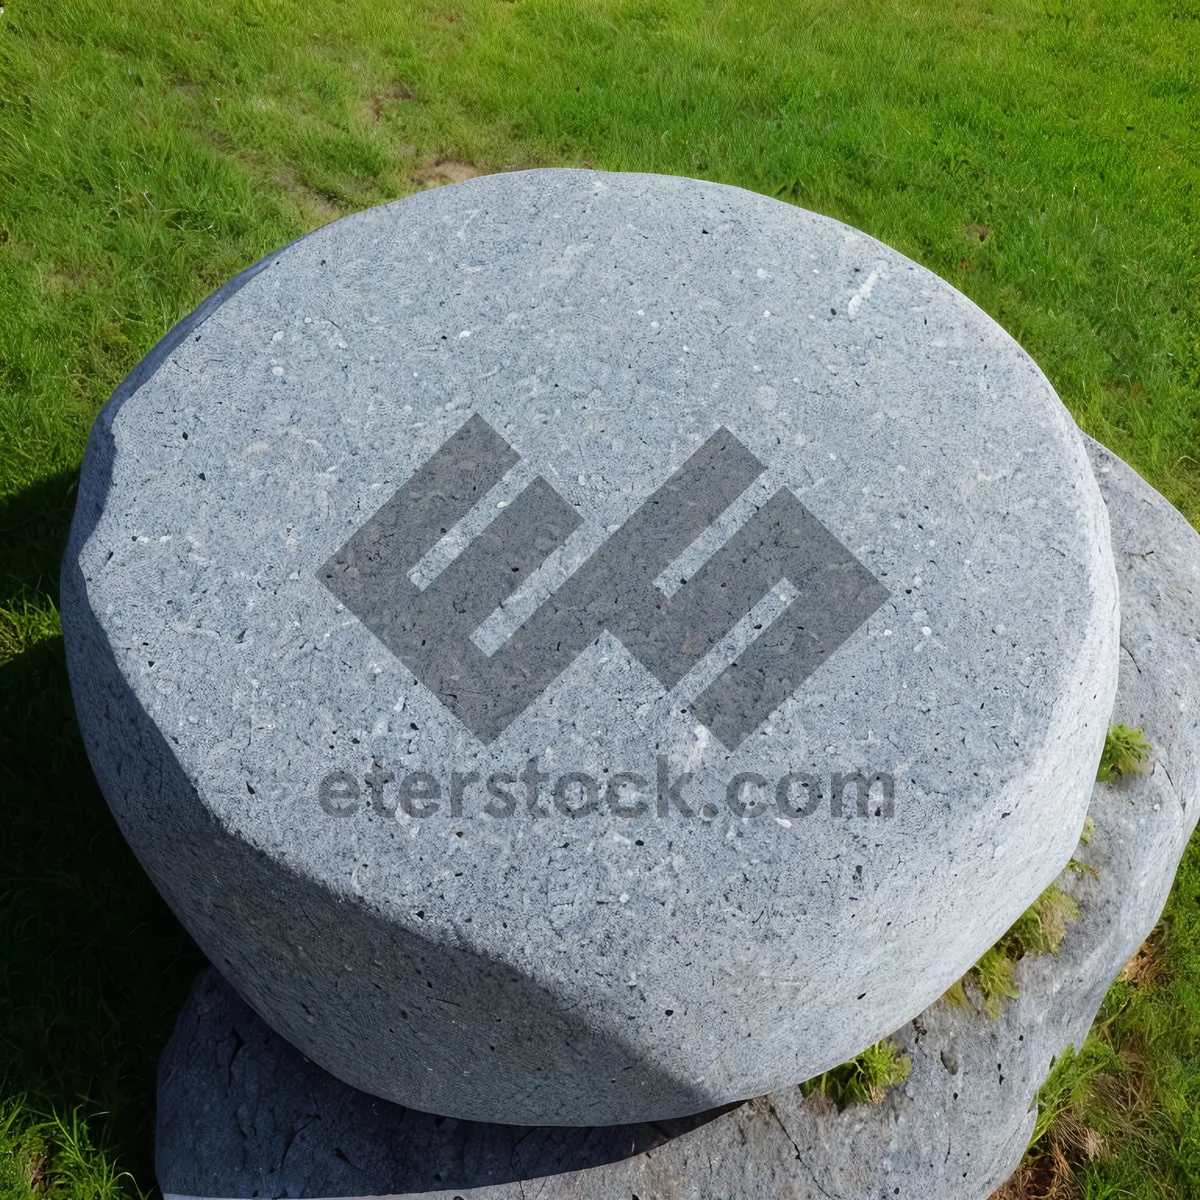 Picture of Golf Ball on Grass with Stone Memorial